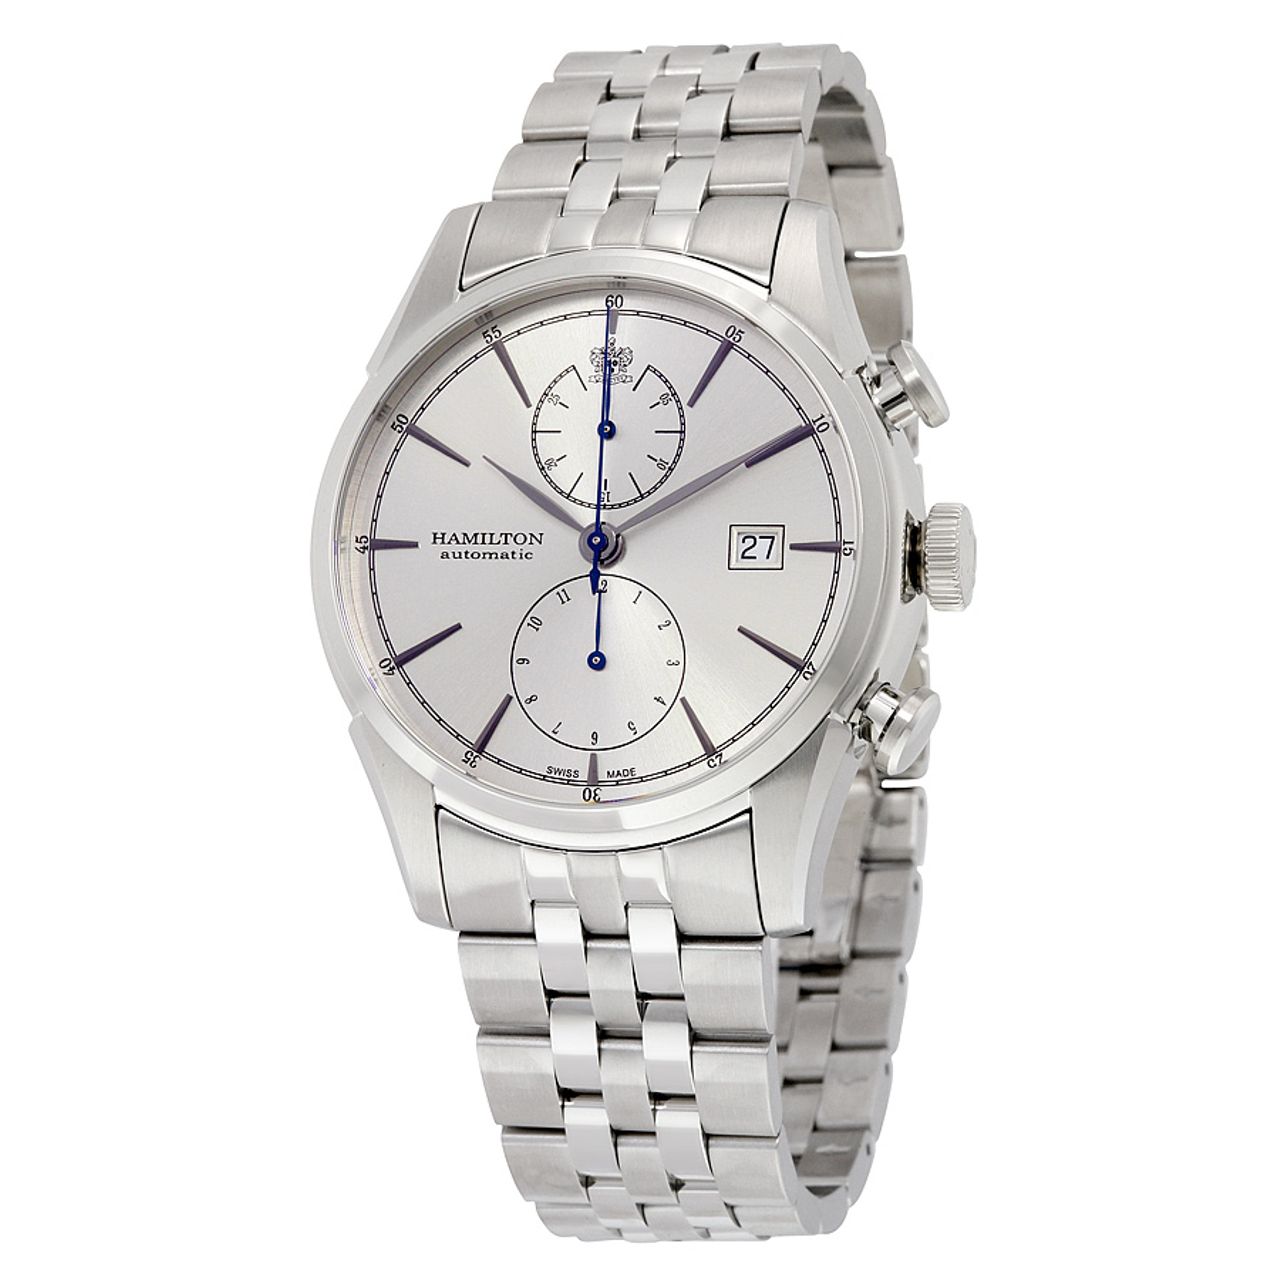 Hamilton H32416981 Mens Silver Dial Analog Automatic Watch